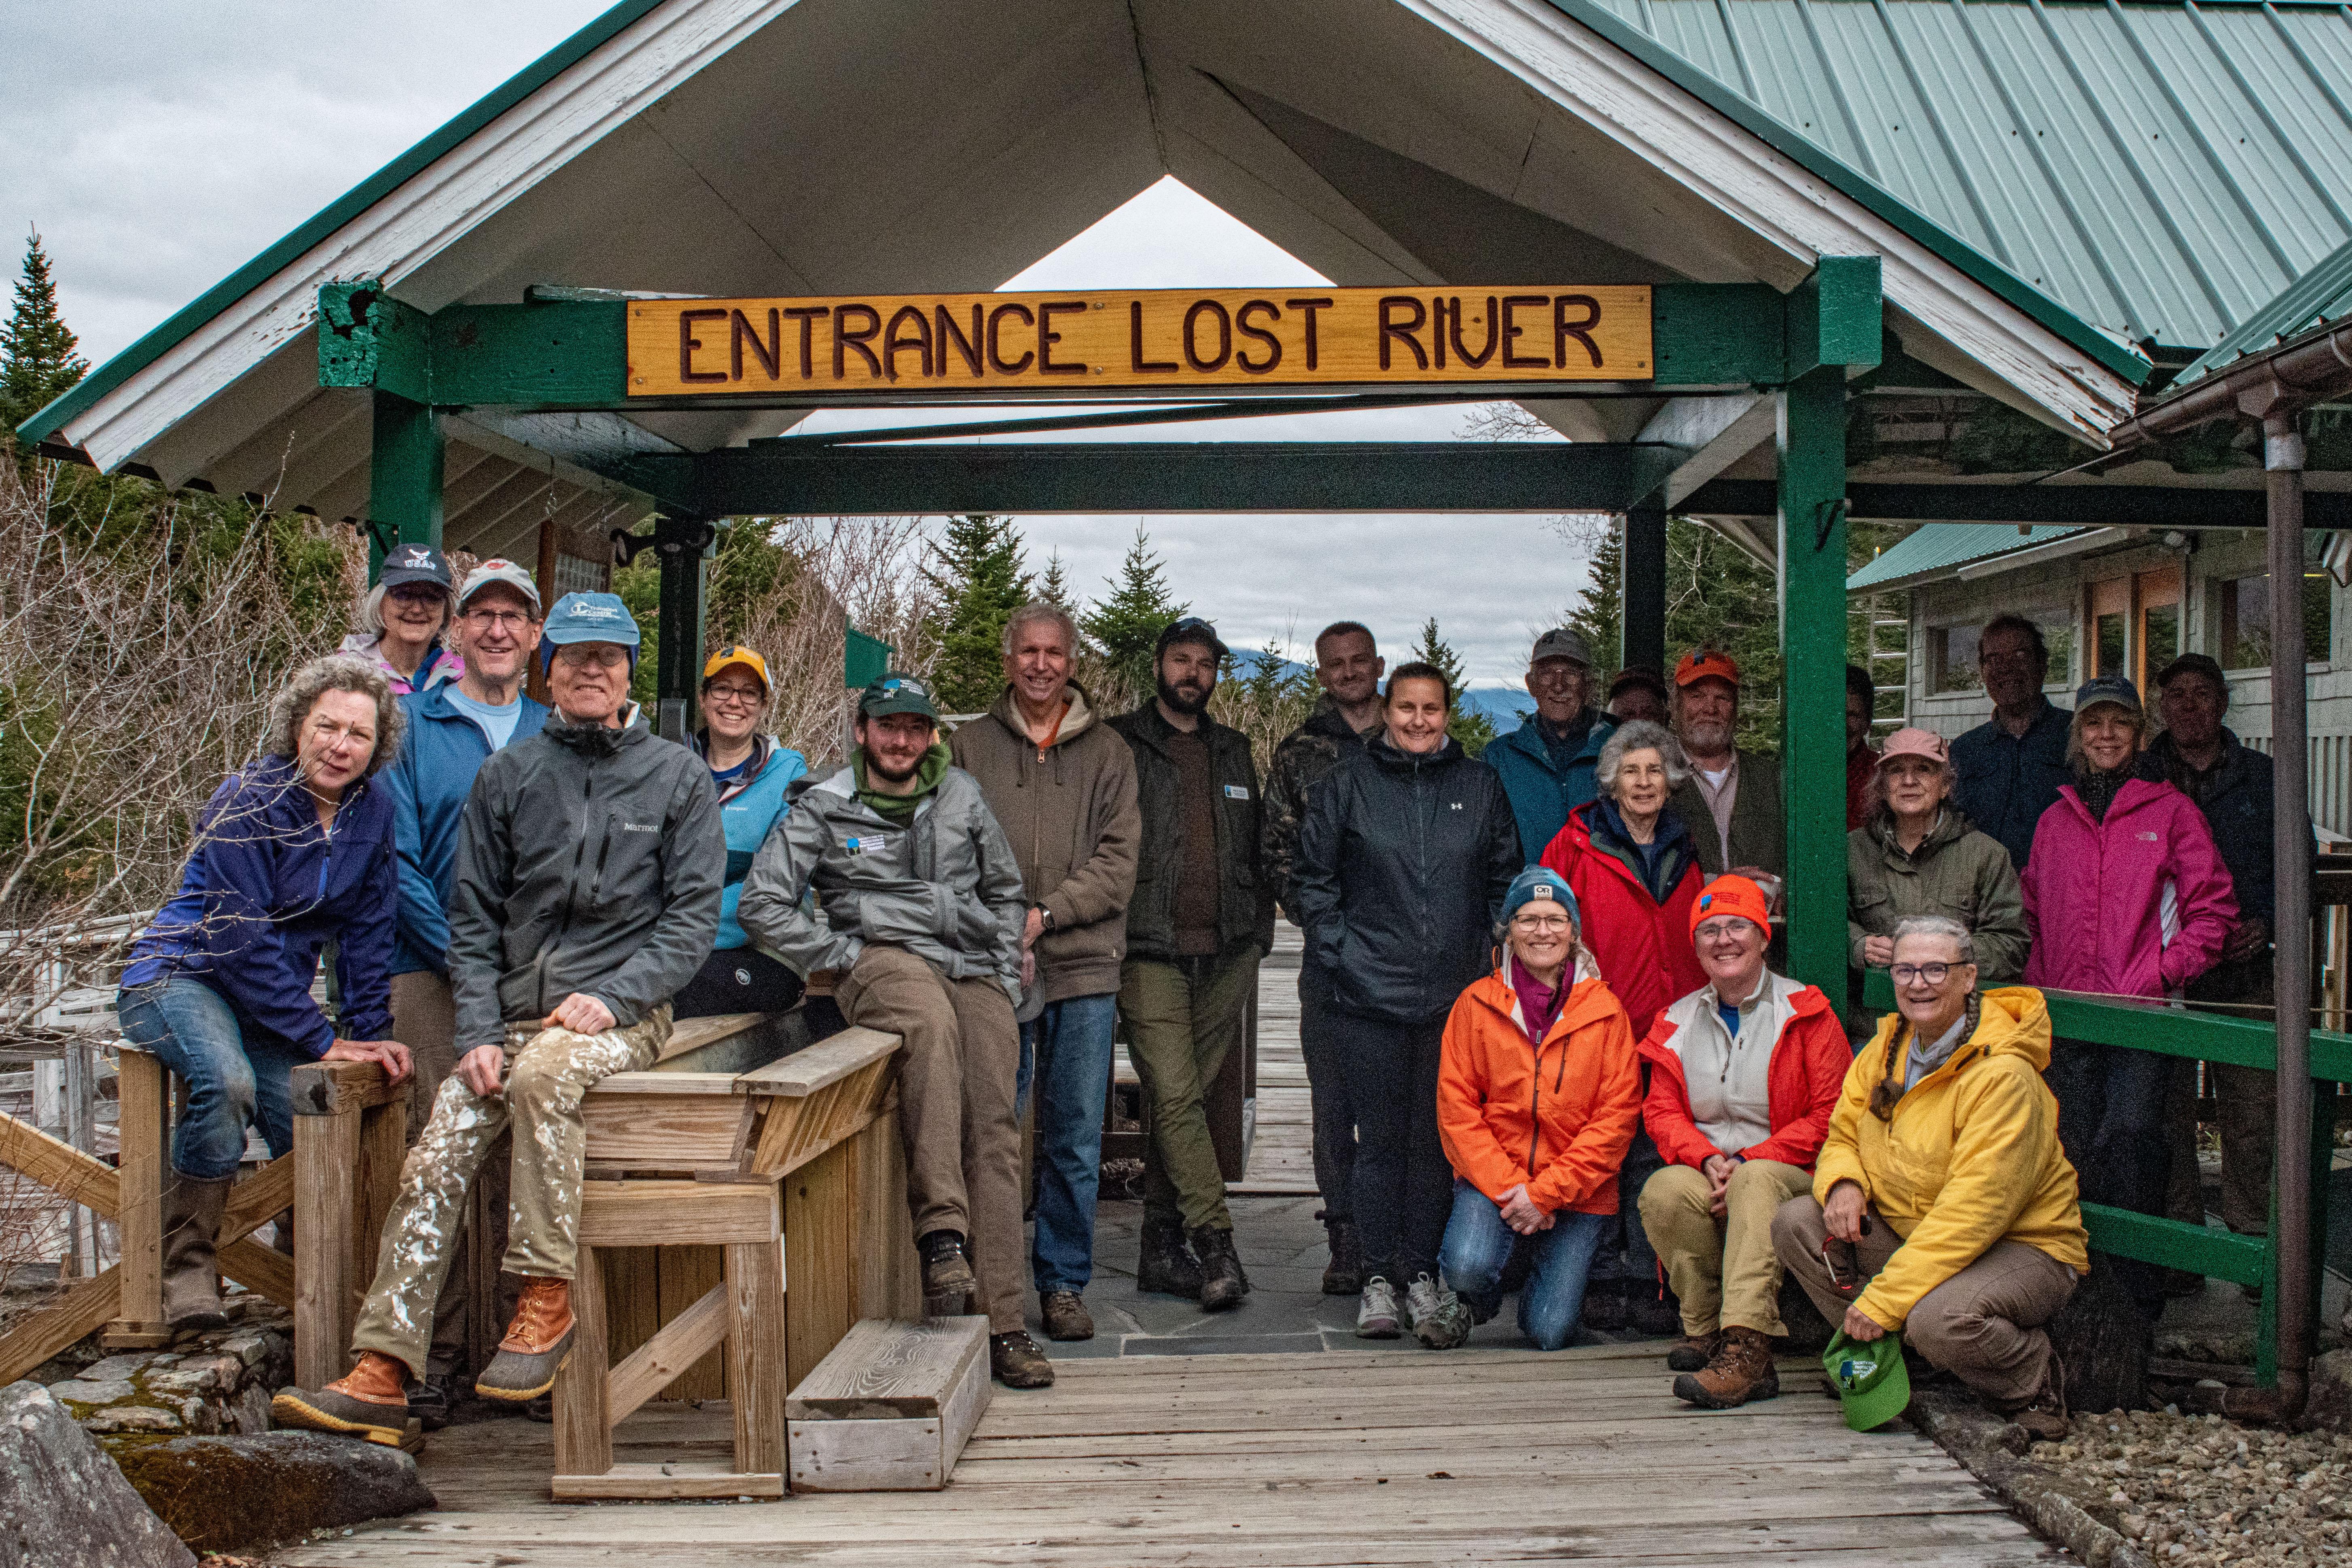 Volunteers pose in warm gear at the entrance to Lost River Gorge.